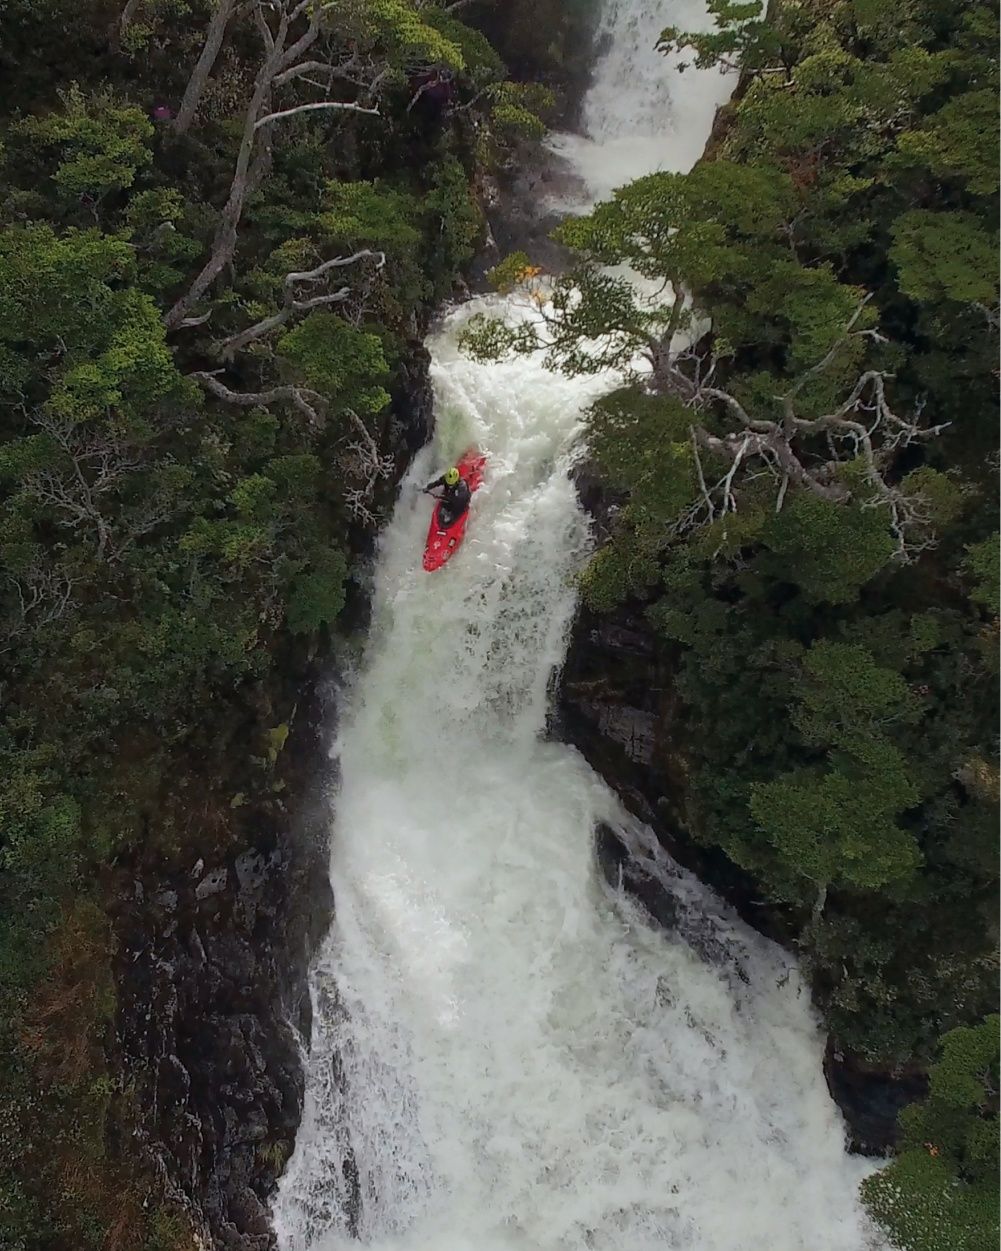 A person in a red kayak descends on a waterfall.